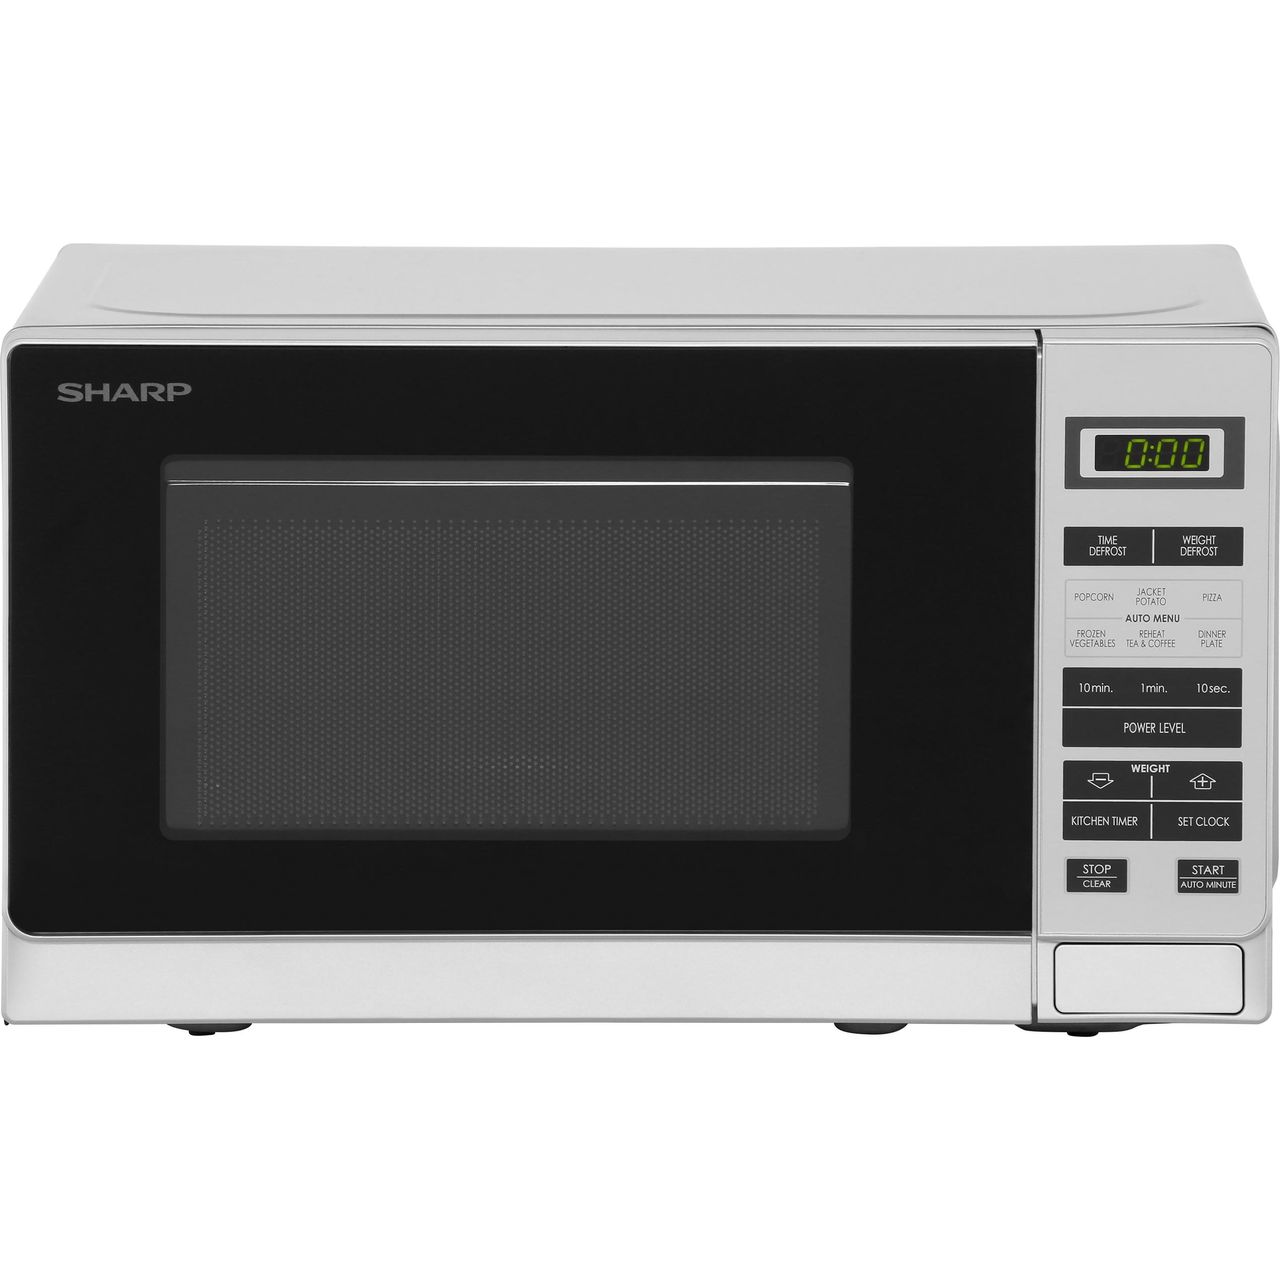 Sharp 800w Microwave With Grill R662slm ManualBestMicrowave